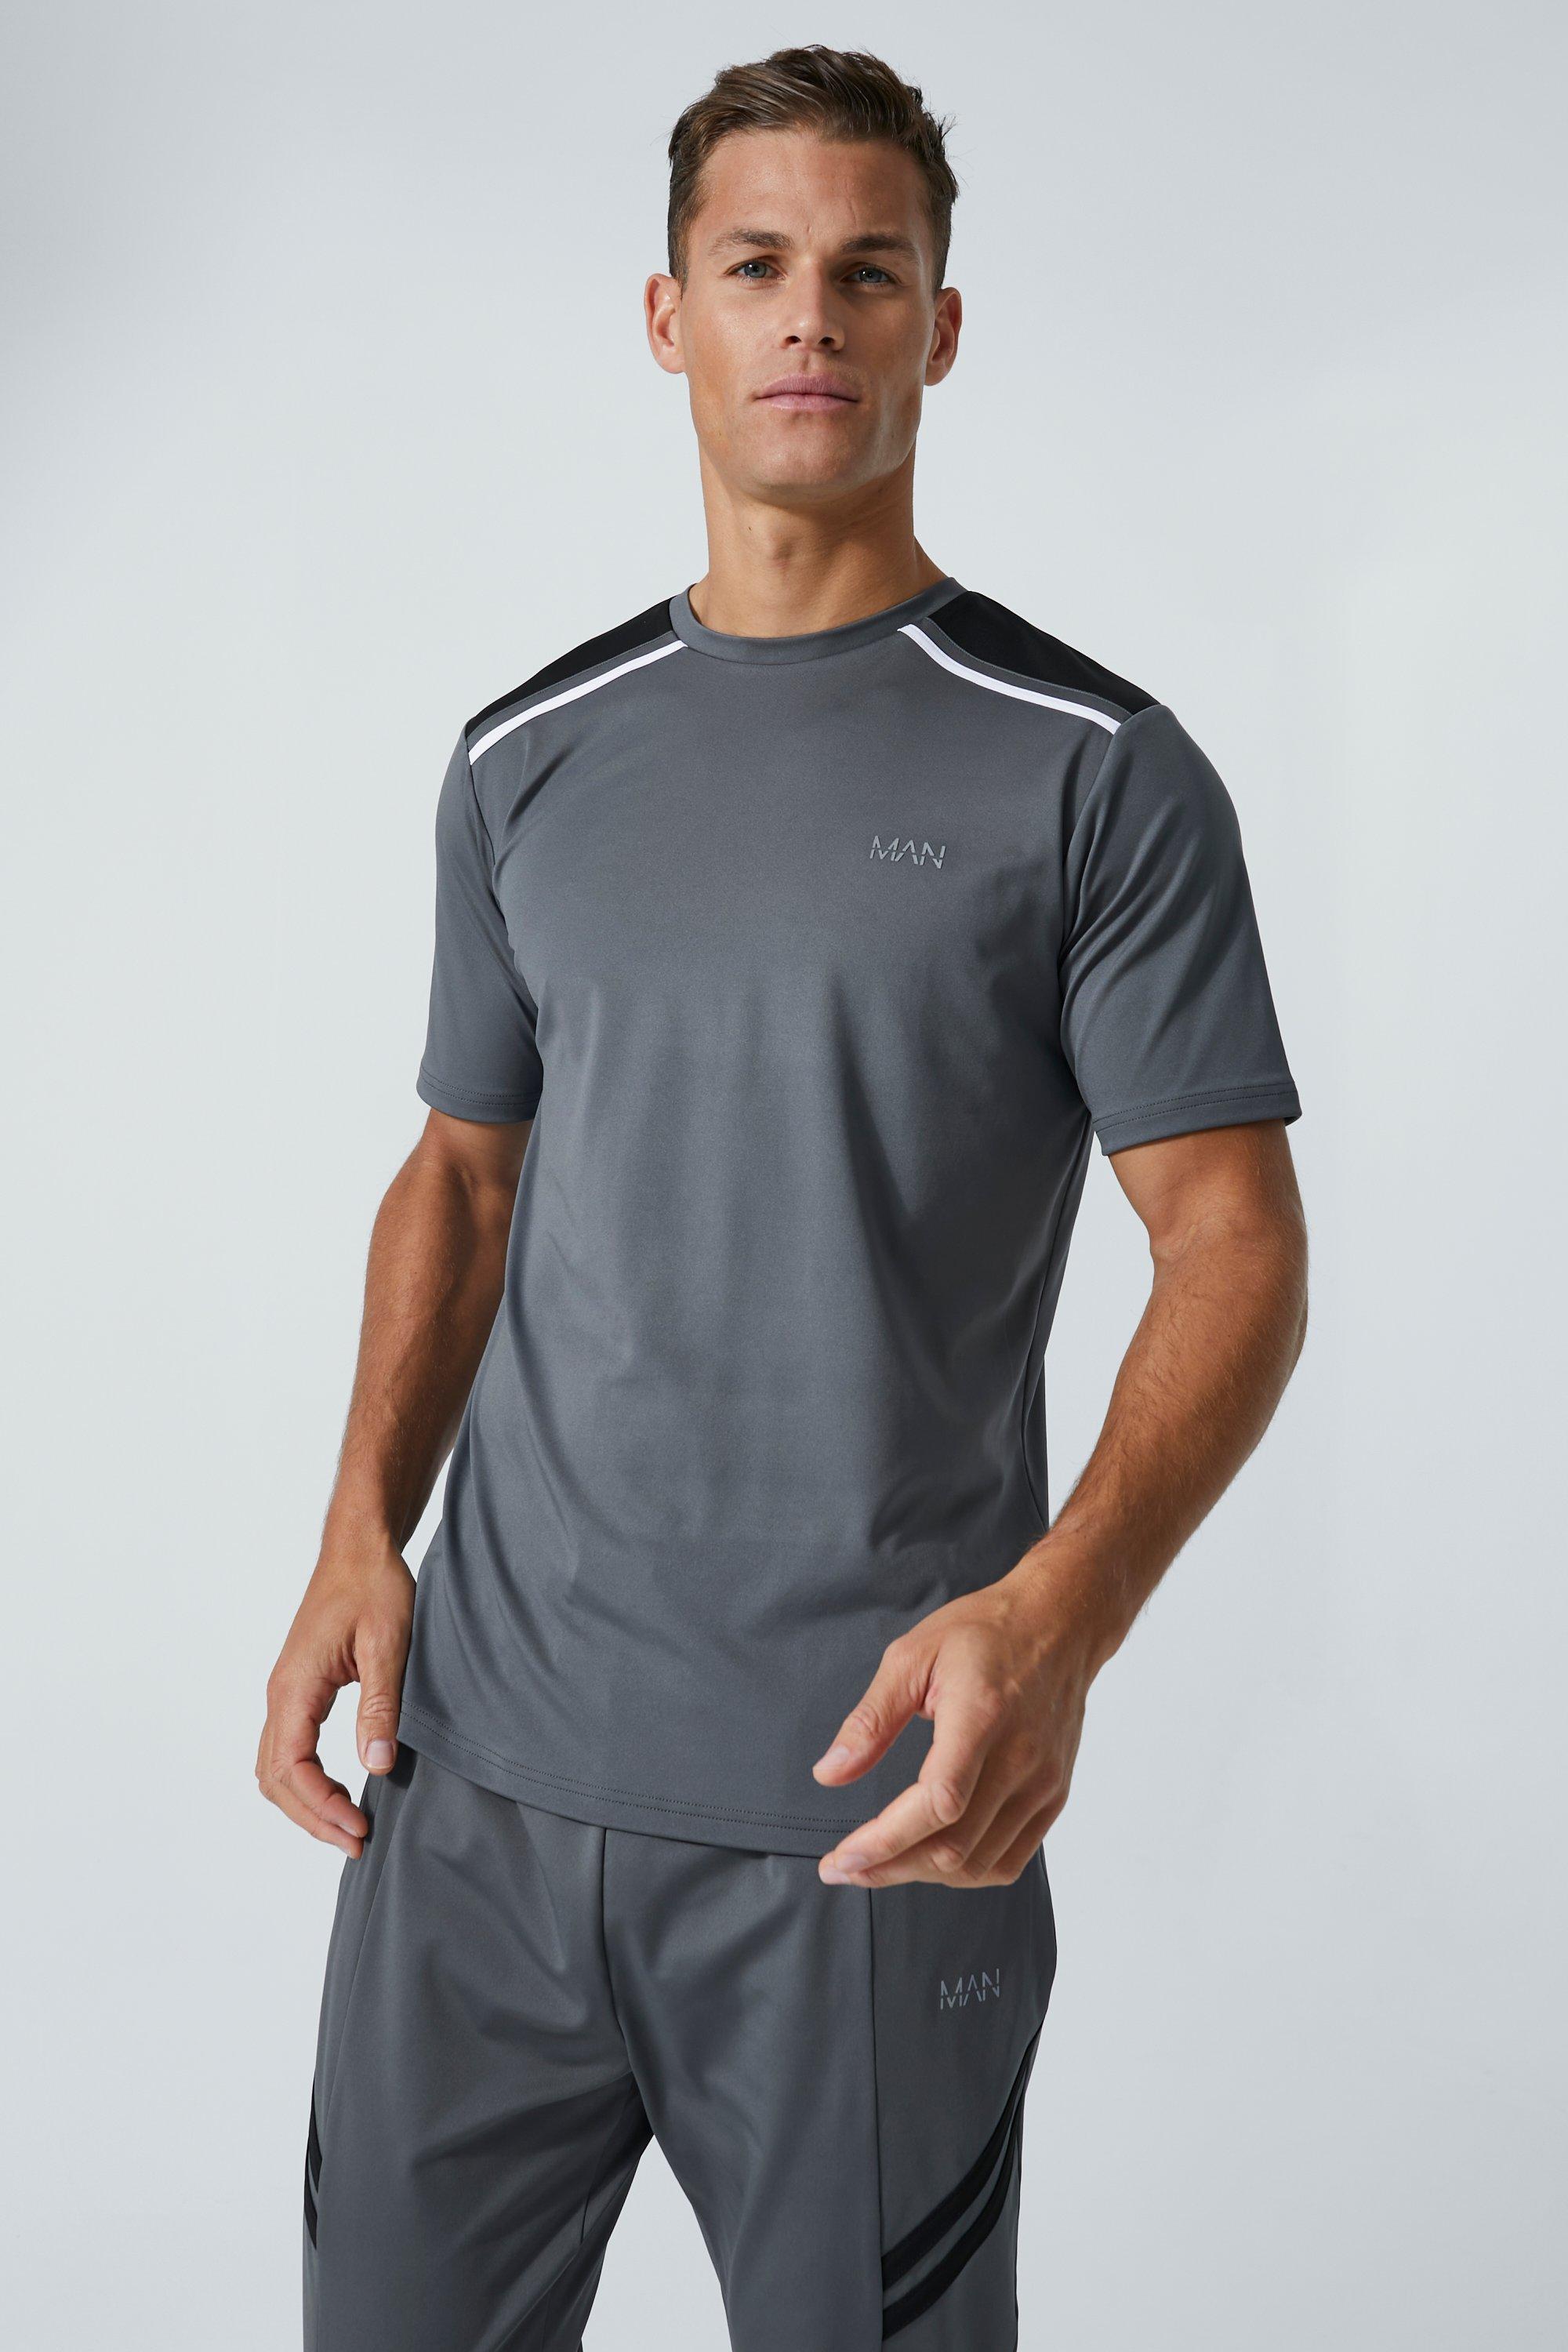 Tall Man Active Performance Voetbal T-Shirt, Charcoal